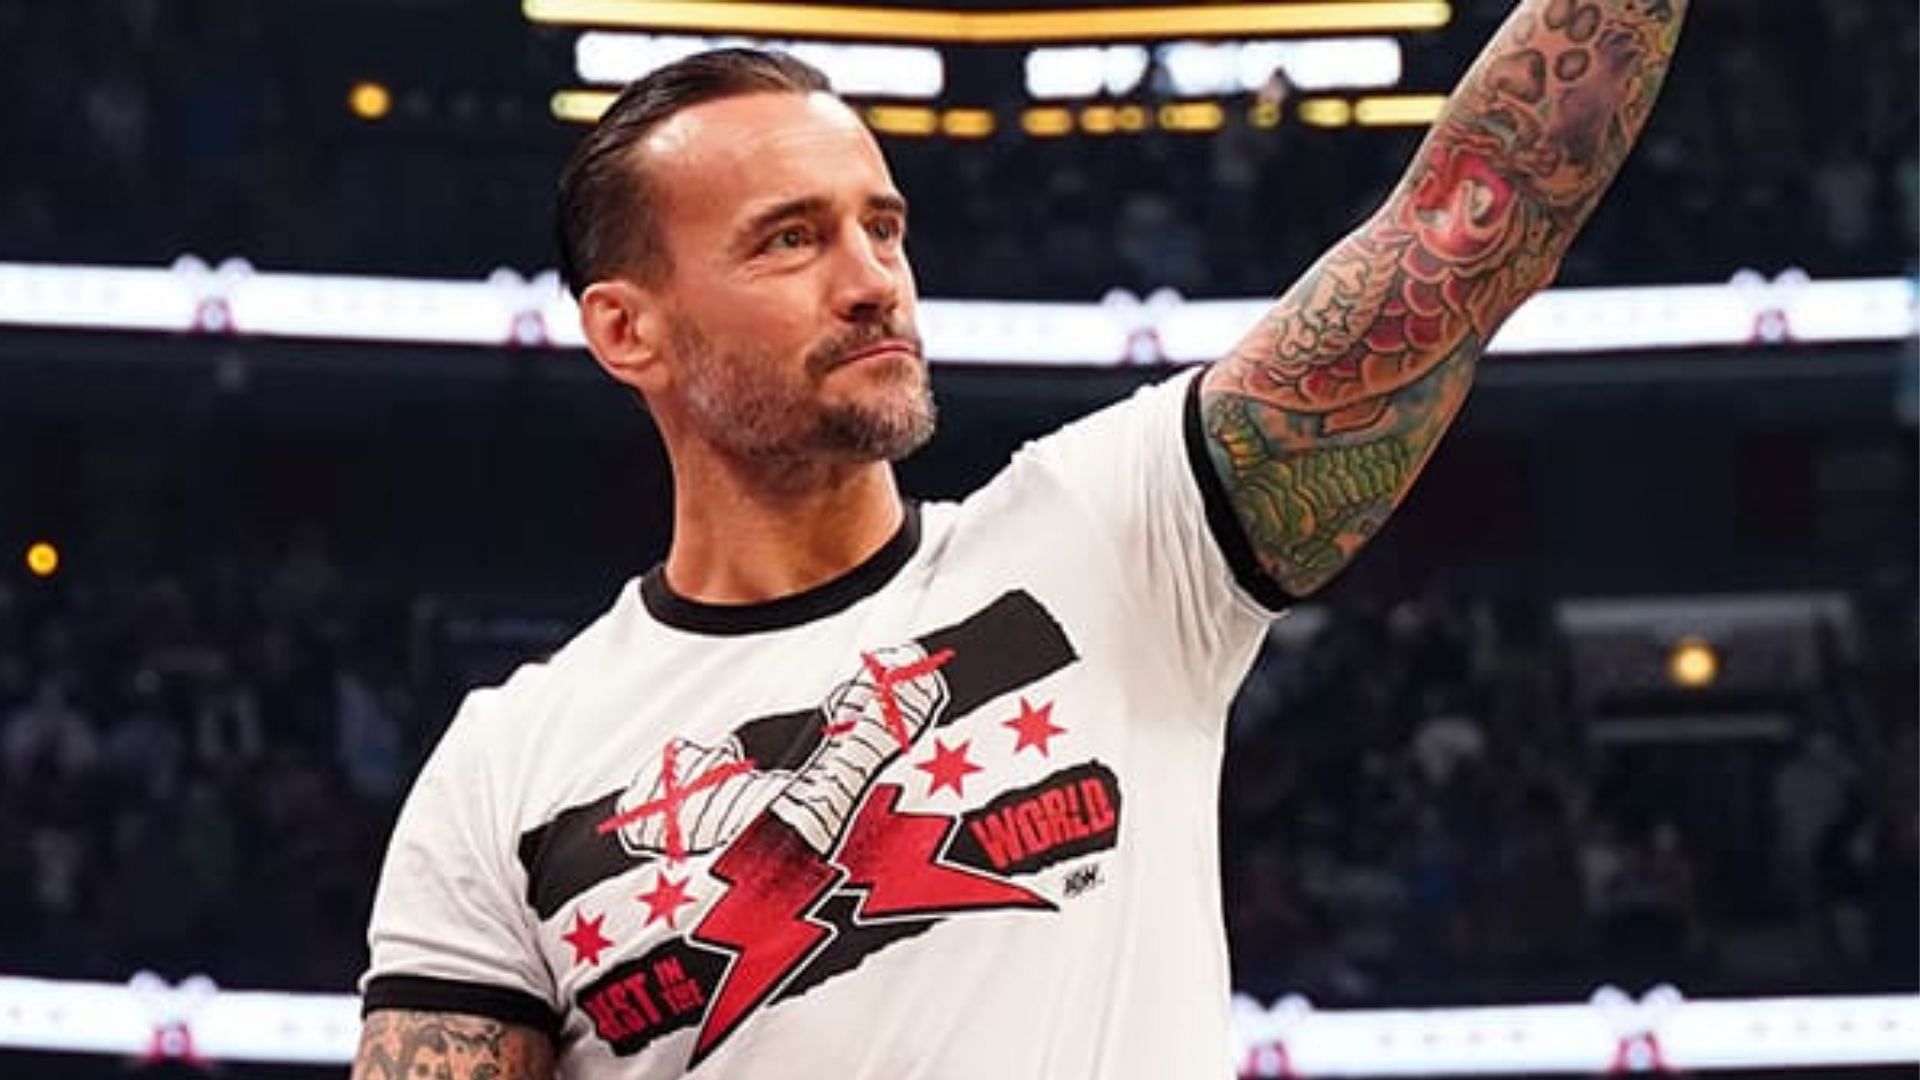 There has been another update regarding CM Punk